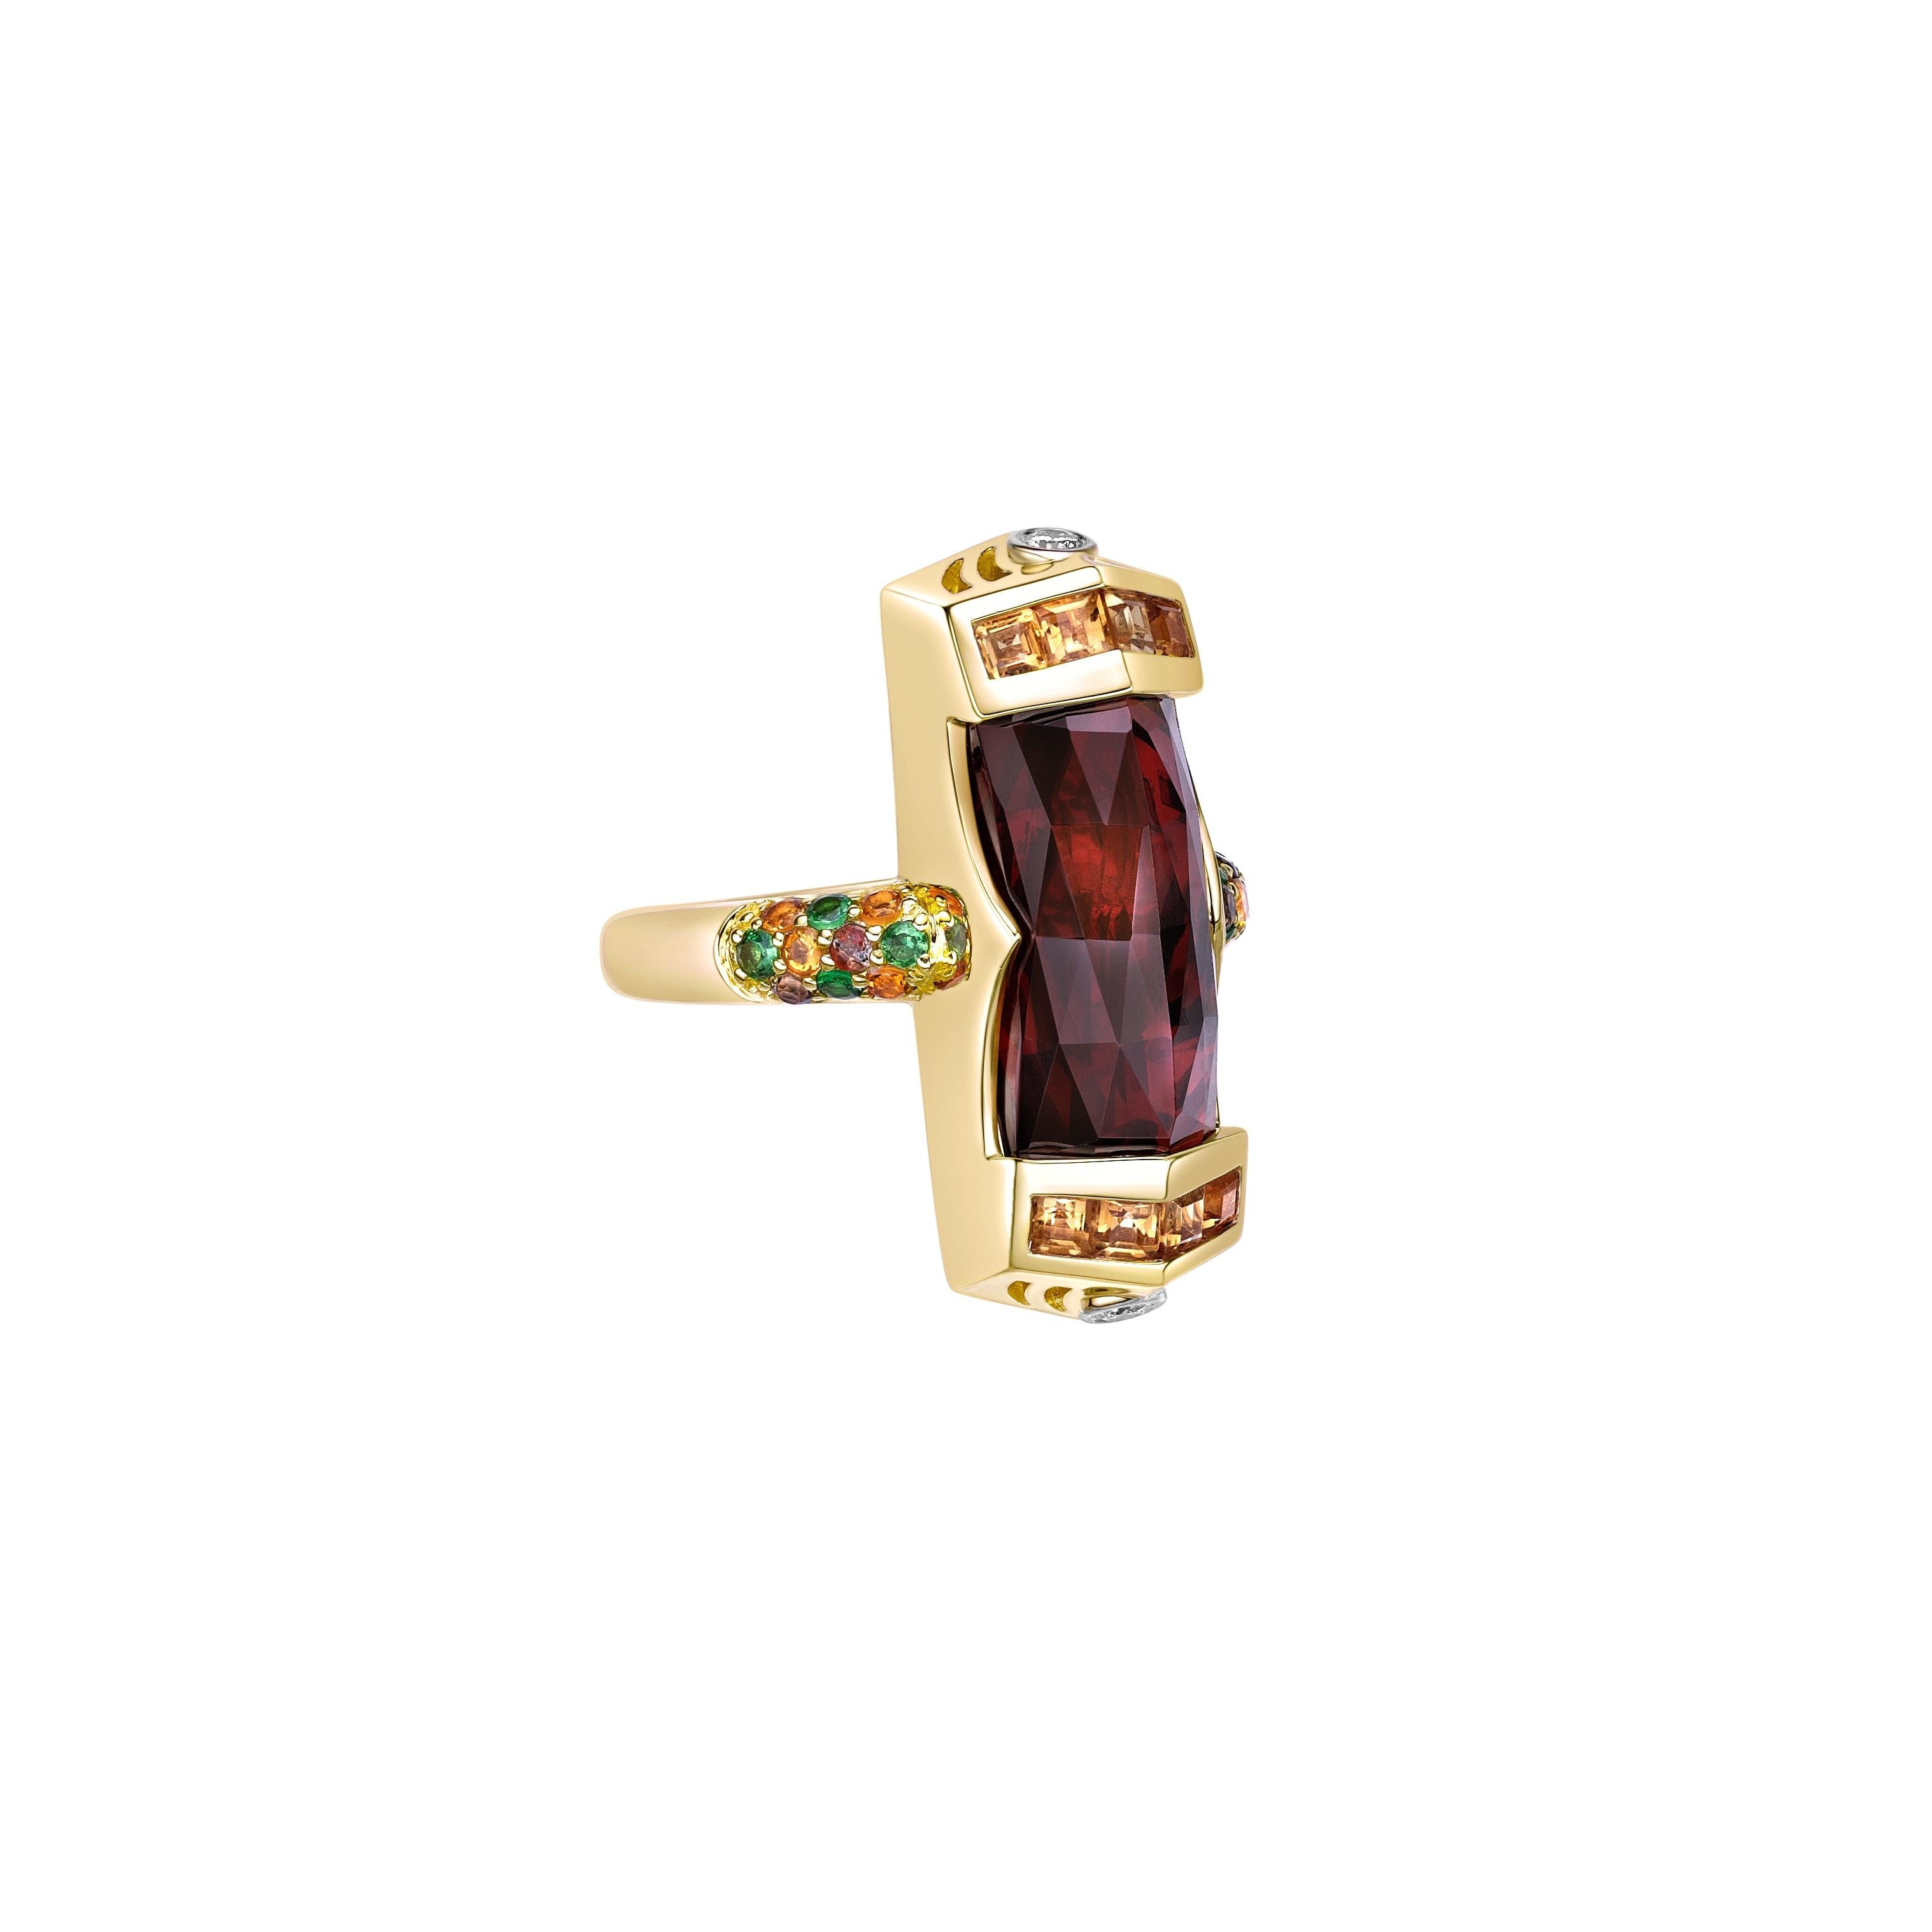 Sunita Nahata has presented cocktail rings to her line. Wearing these rings is meant for special occasions. For ladies who love quality, the cocktail ring line featuring precious stones like Garnet, London blue topaz, Honey quartz and Amethyst is